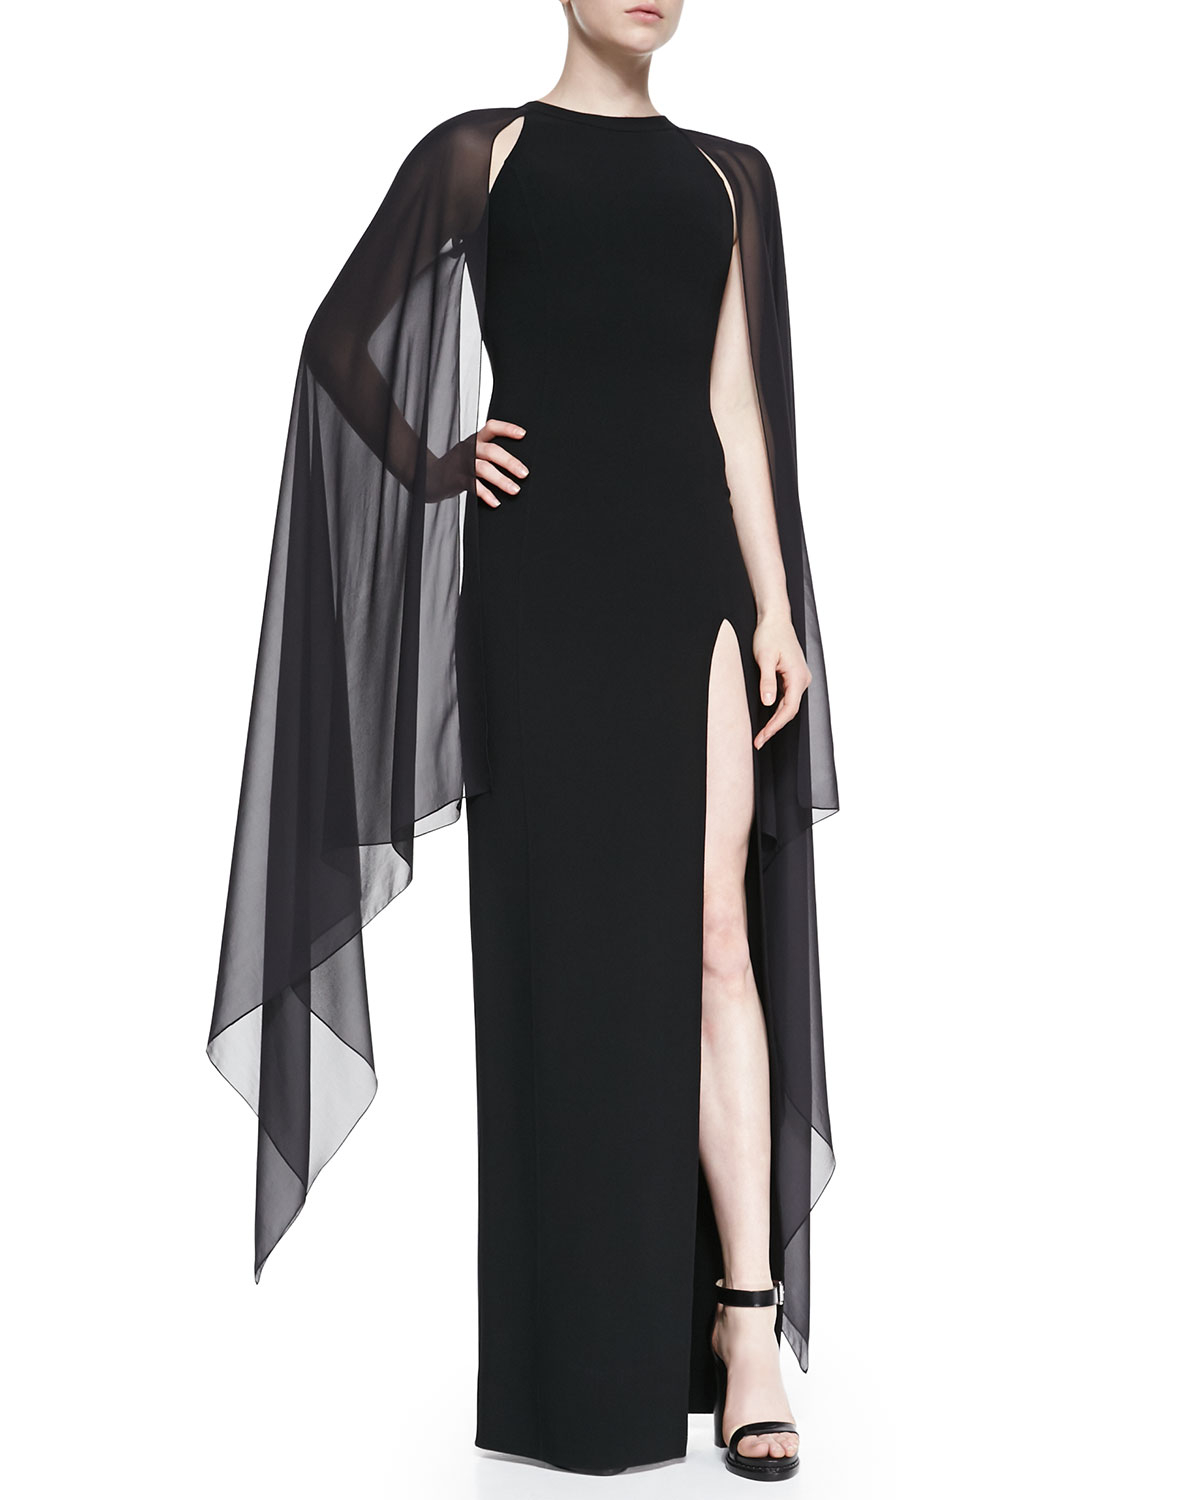 Michael Kors Wool-crepe Gown With Cape Back in Black - Lyst